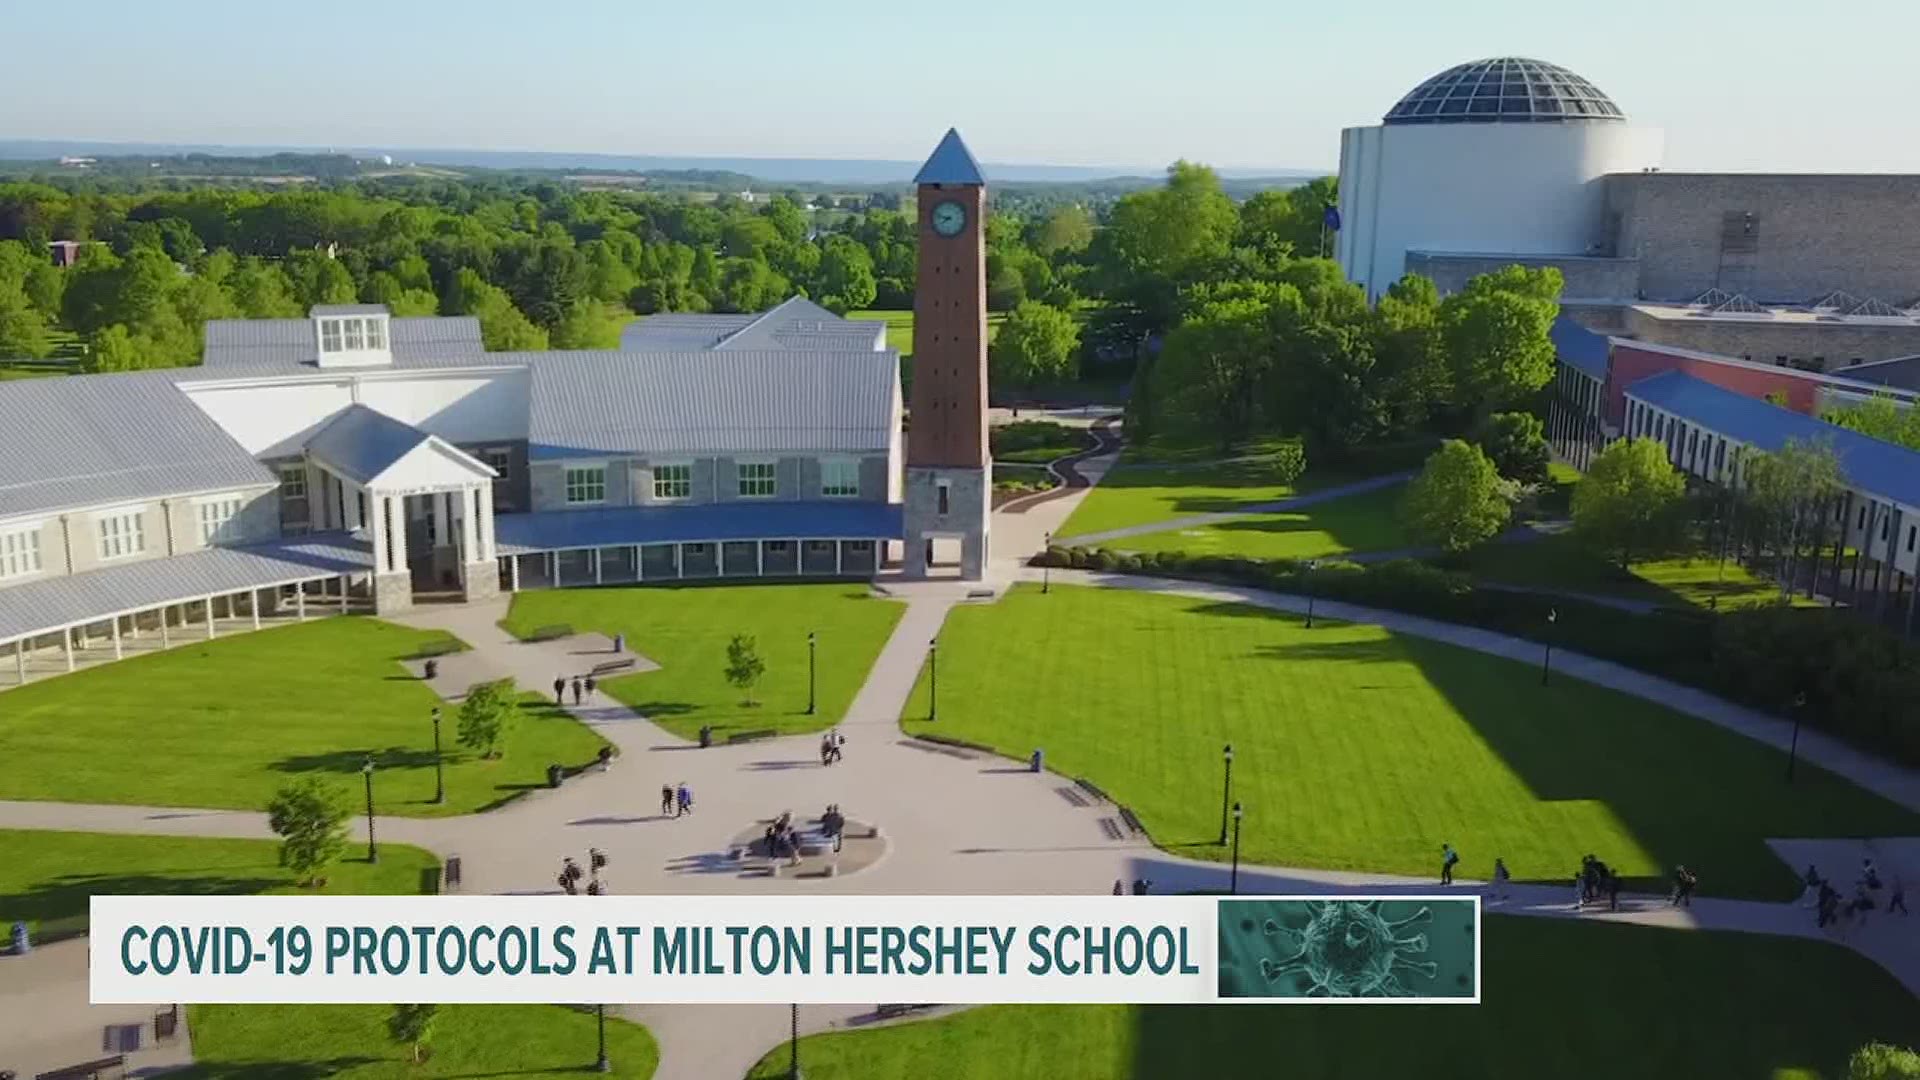 Two months into the school year and lessons have been learned in and out of the classroom at Milton Hershey School as it navigates through a pandemic